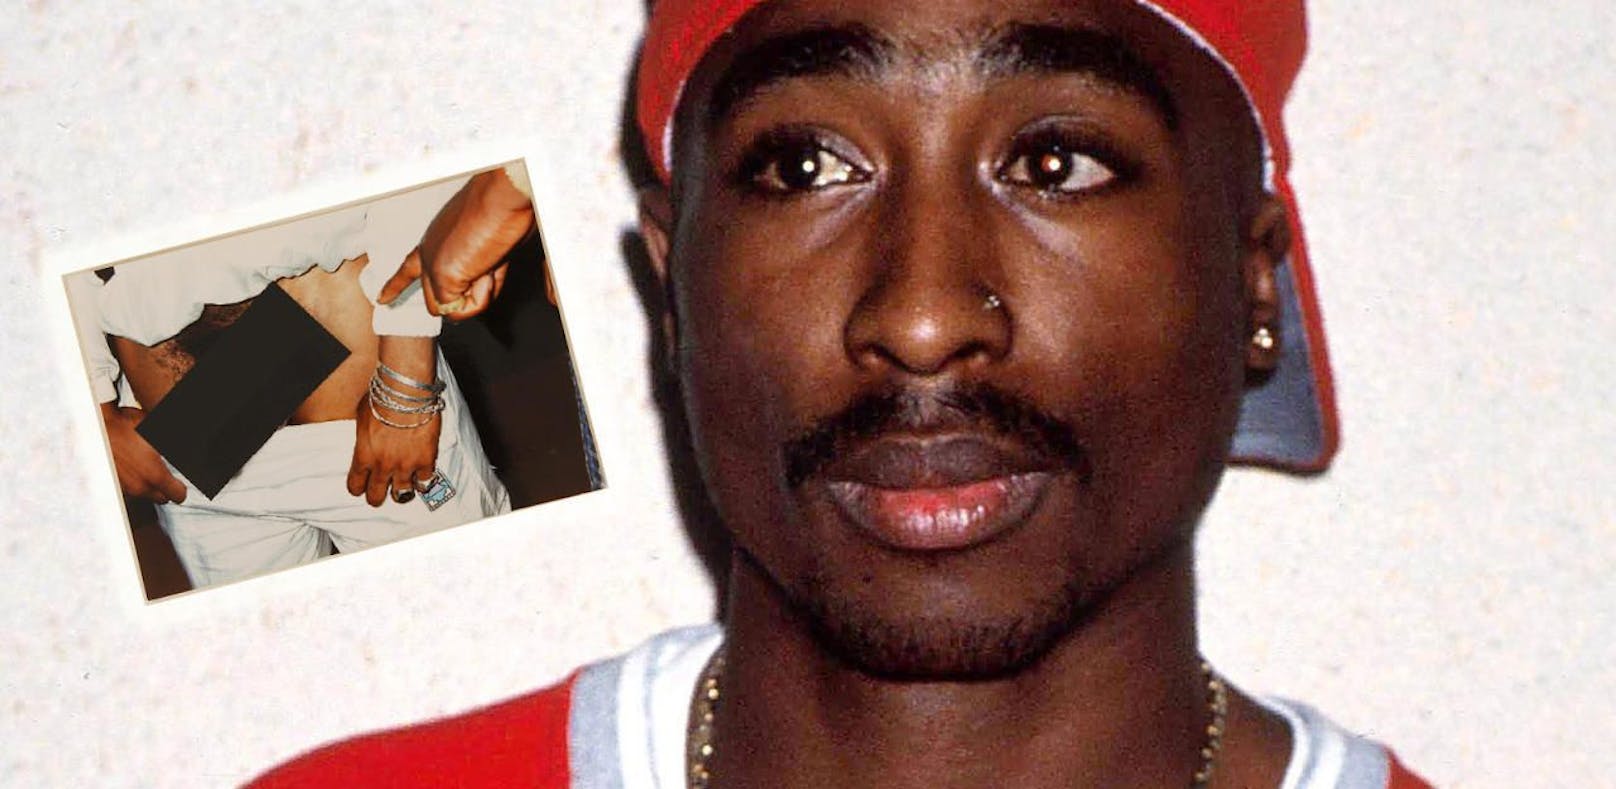 Tupac and Biggie: Rap's greatest rivalry remains top unsolved mystery